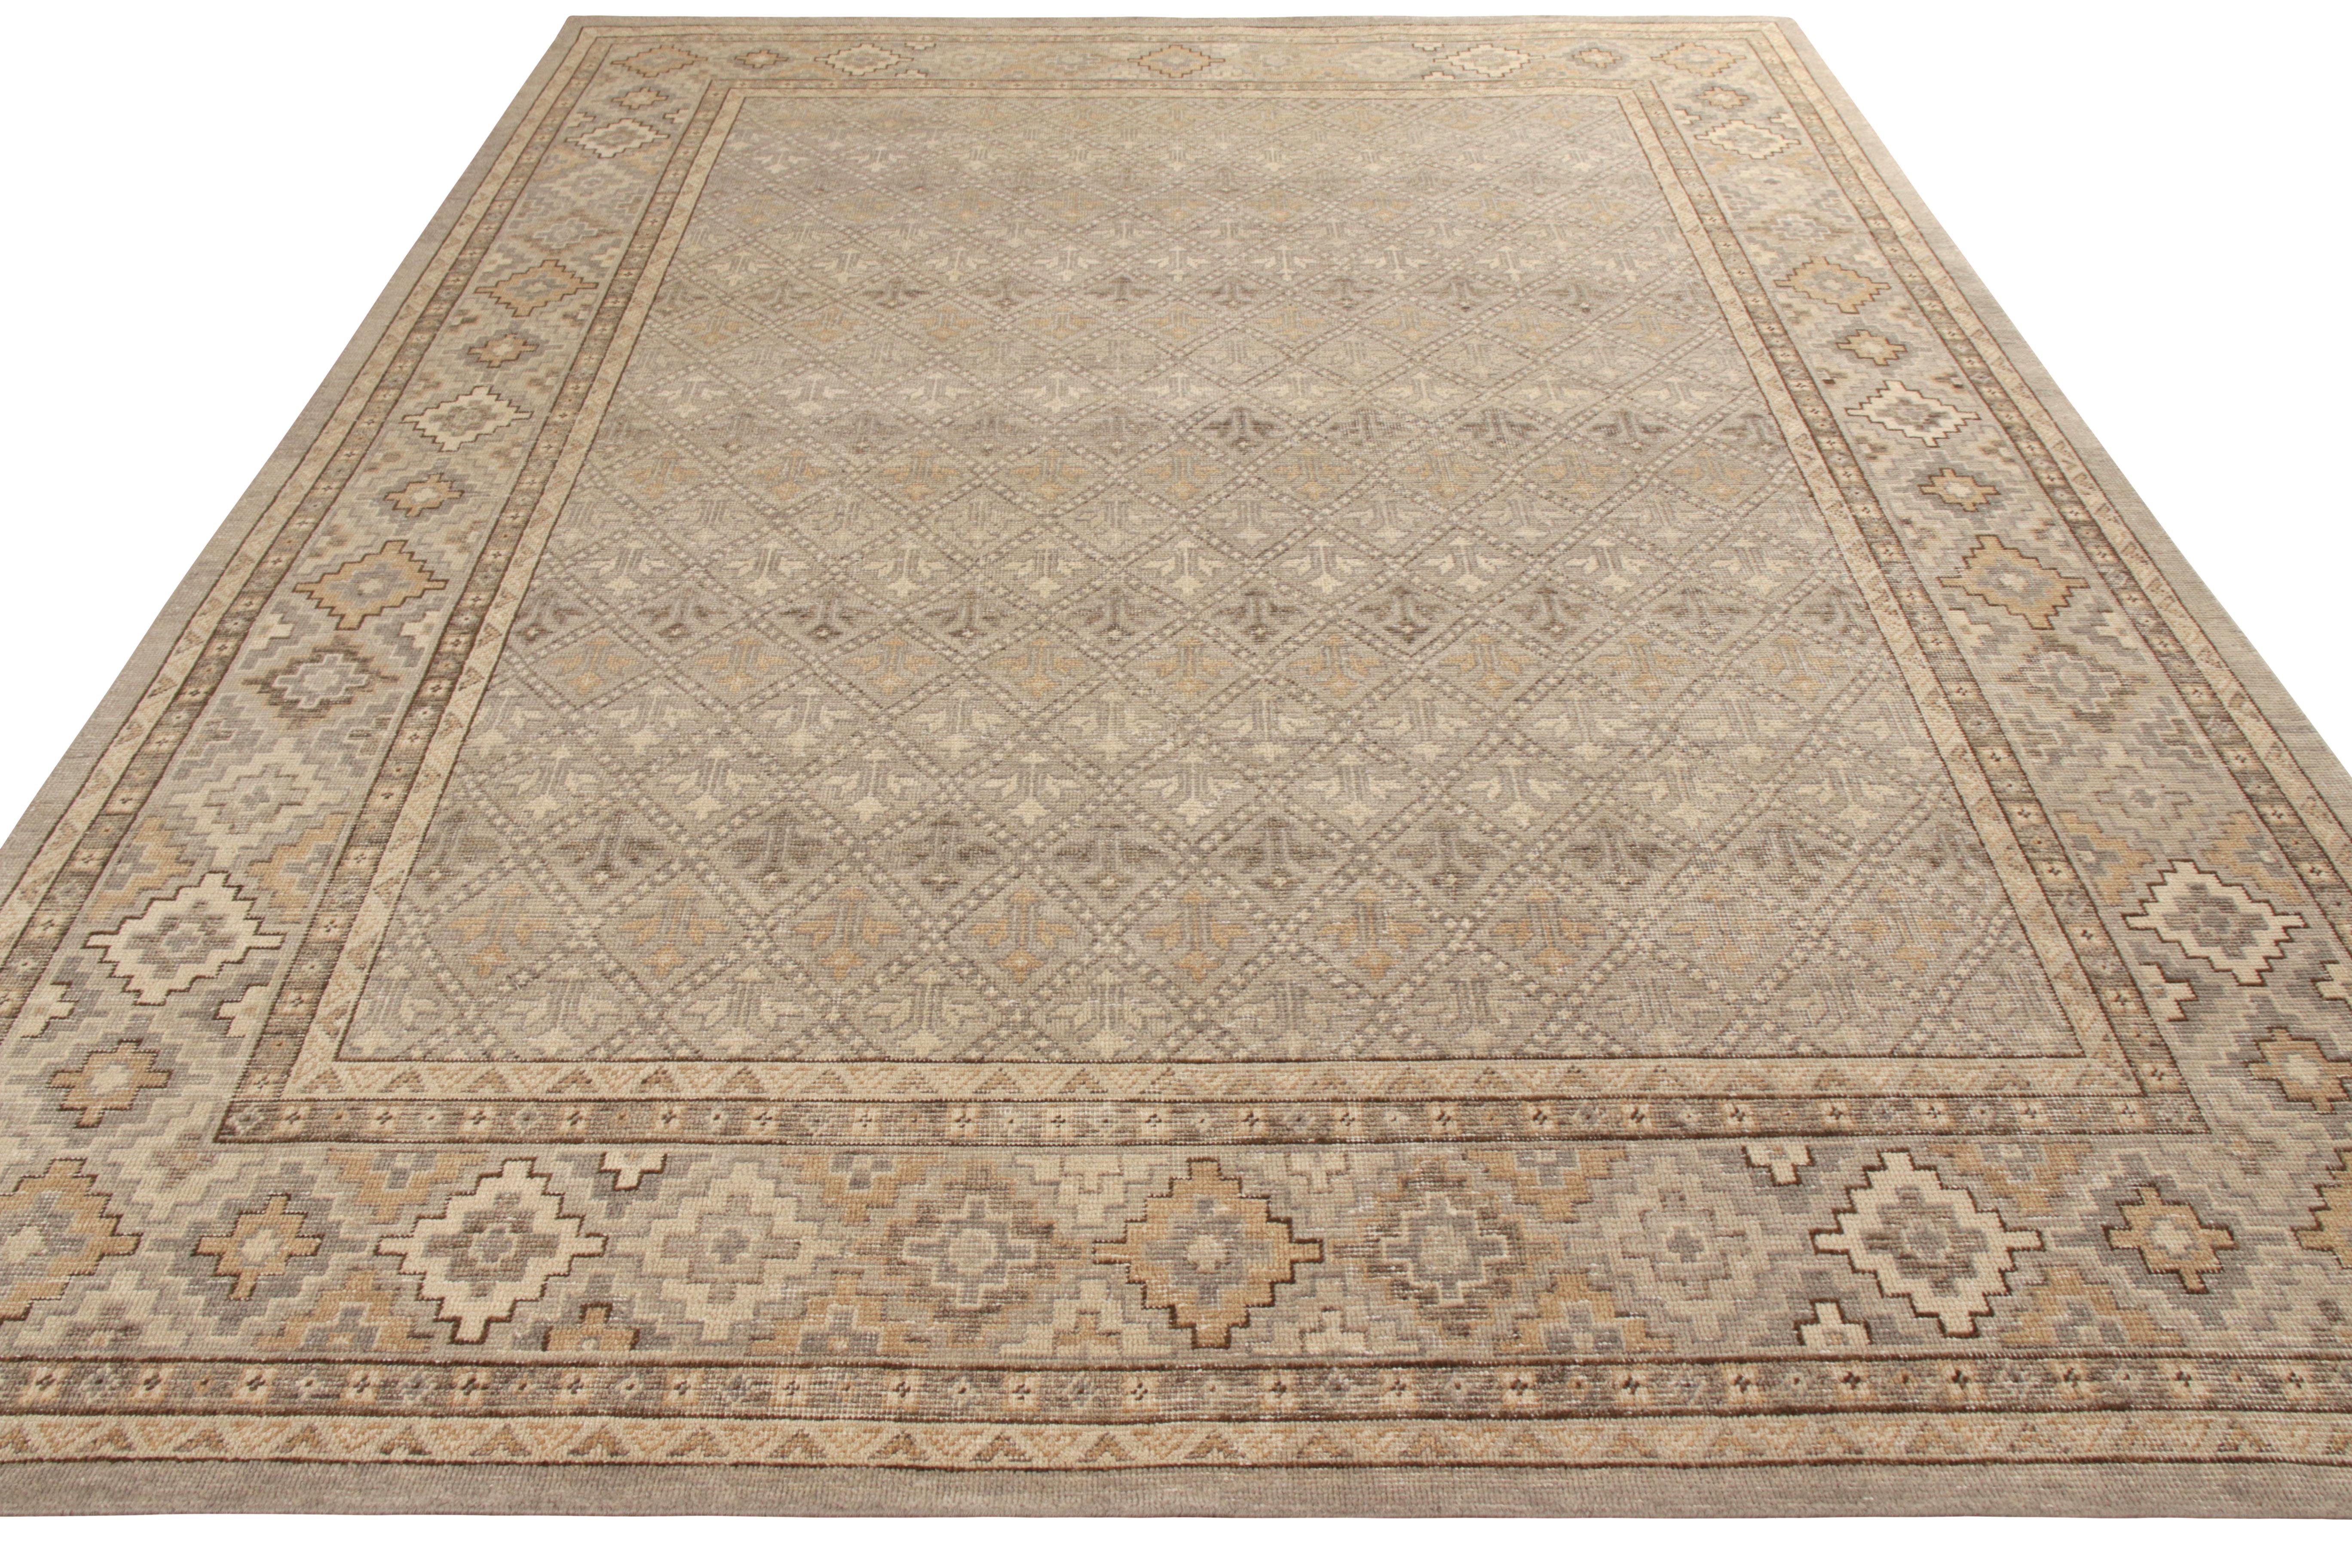 A custom rug design available from the classic selections in Rug & Kilim’s Homage Collection—hand knotted in wool with a shabby-chic, distressed texture. Exemplified in this 9 x 12 play of beige-brown and gray with an all over geometric pattern,